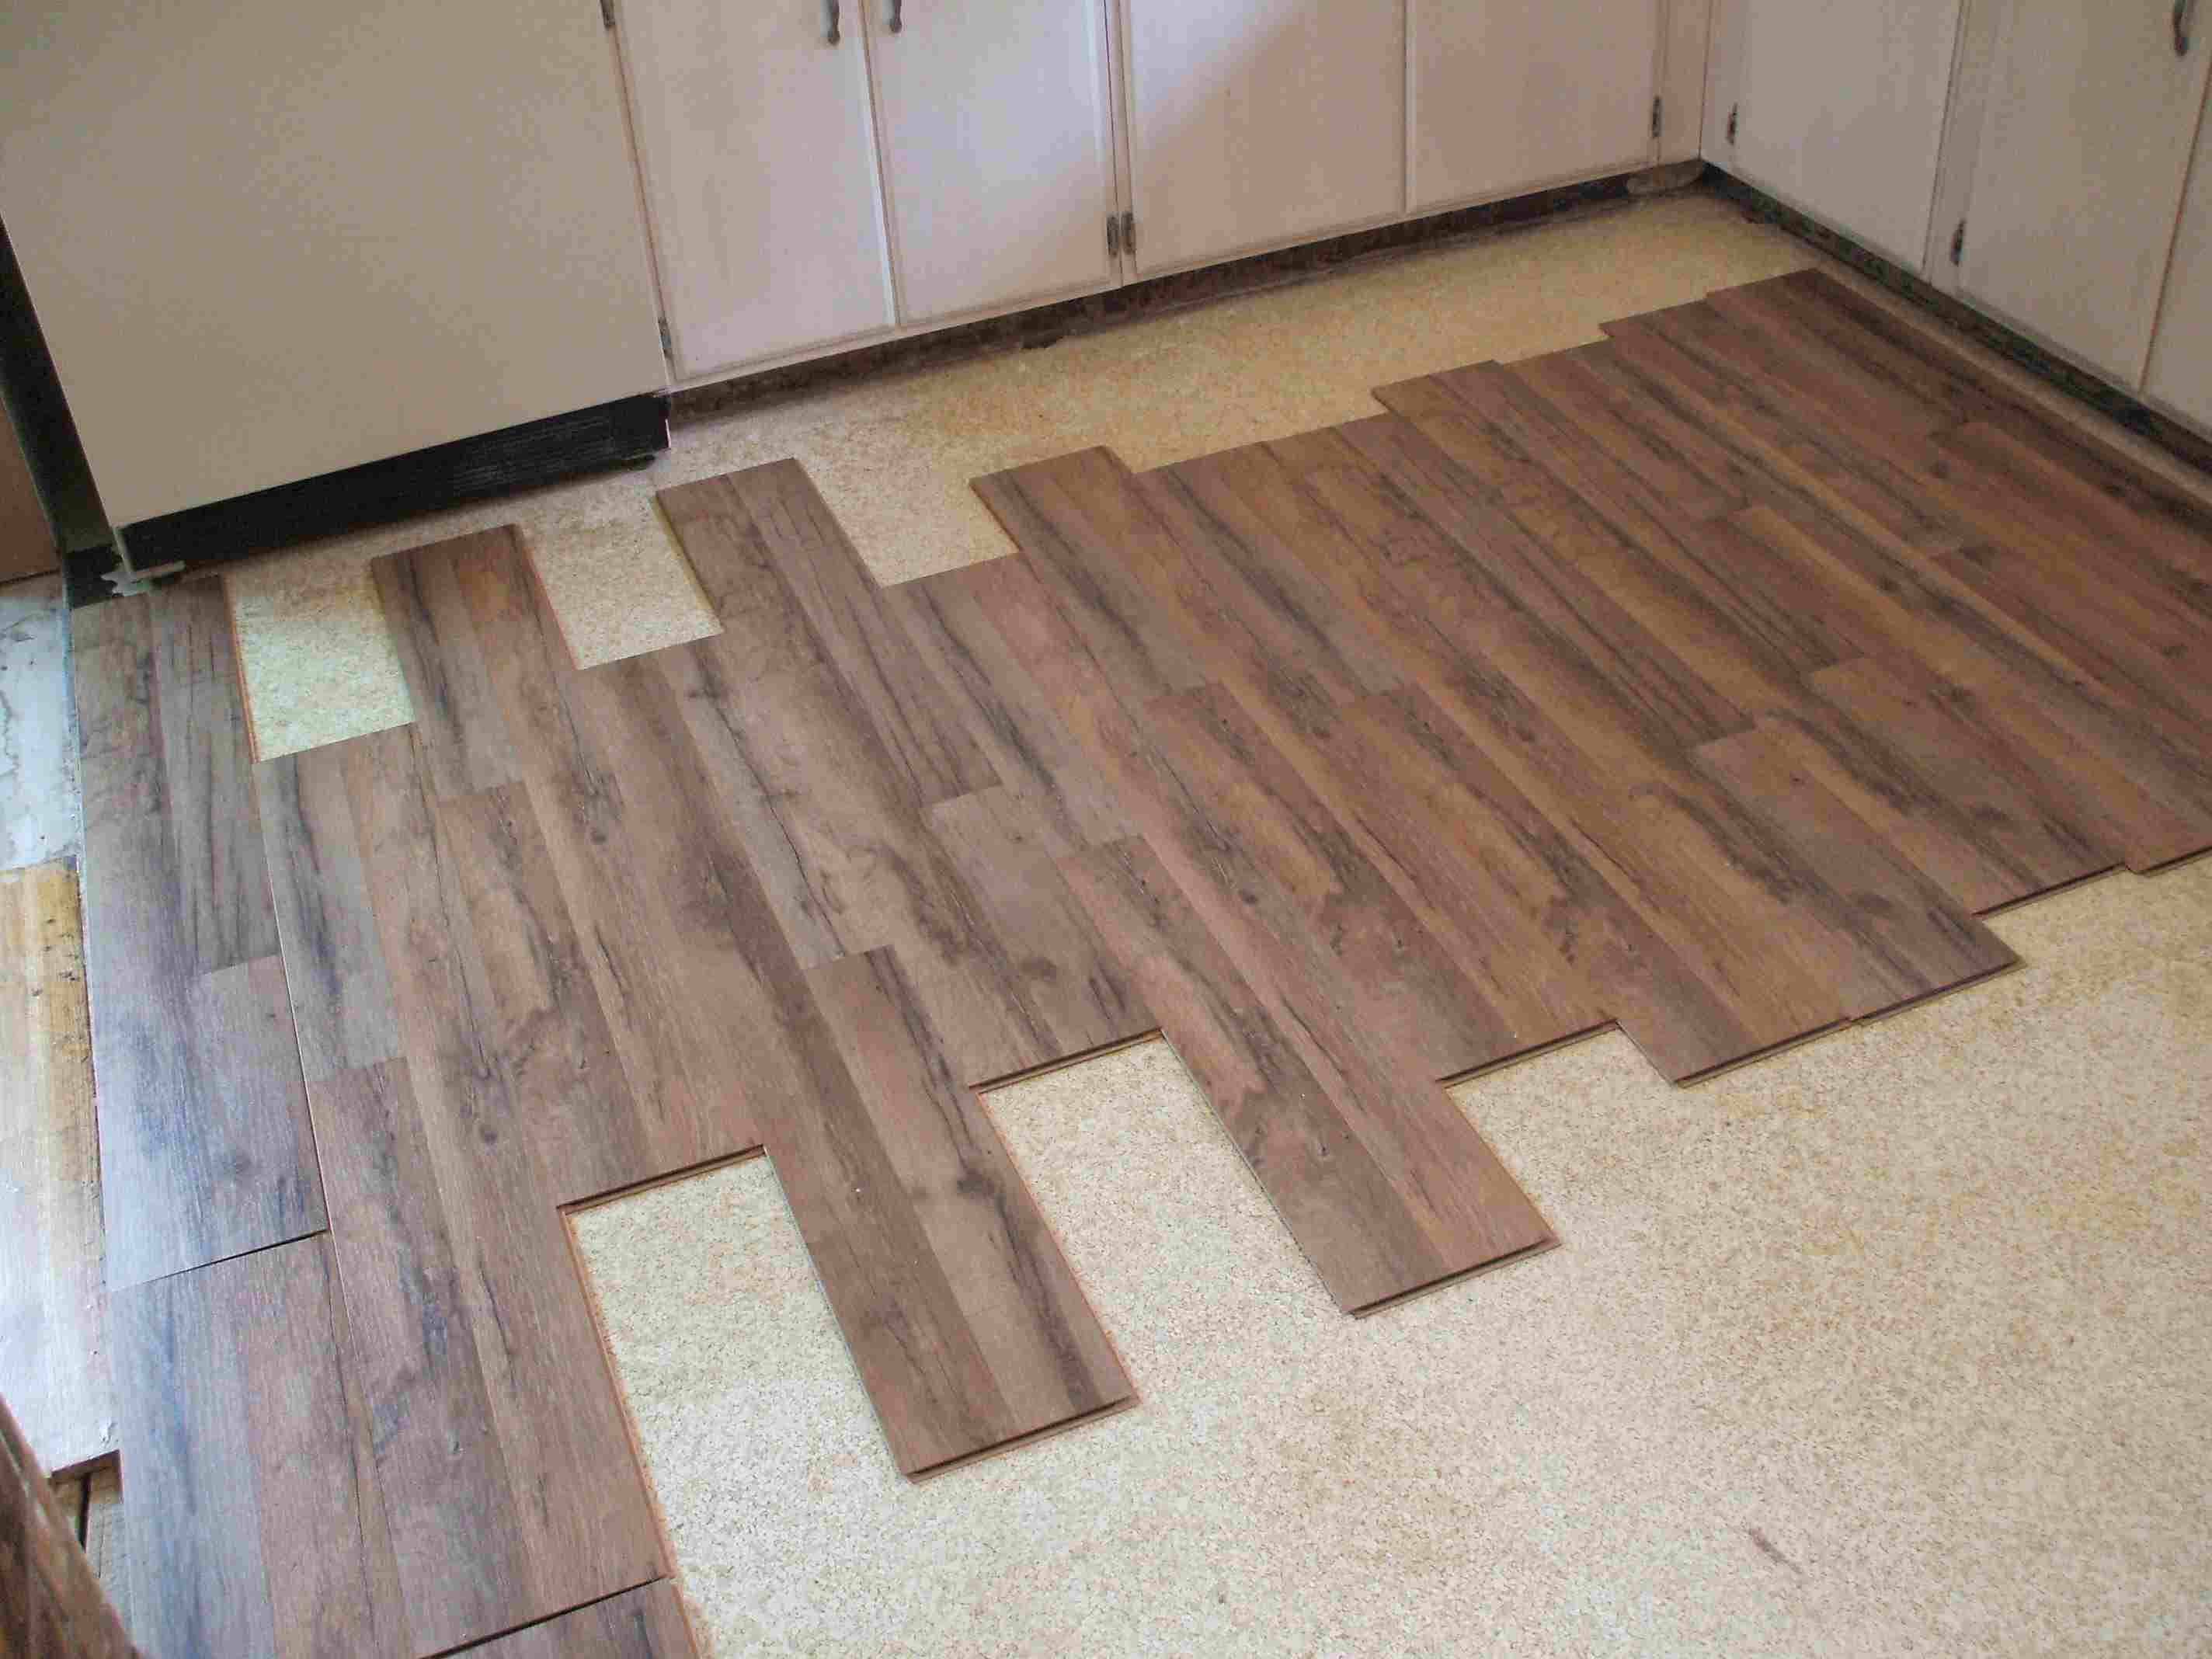 best way to install hardwood floors on concrete of laminate flooring installation made easy in installing laminate eyeballing layout 56a49d075f9b58b7d0d7d693 jpg